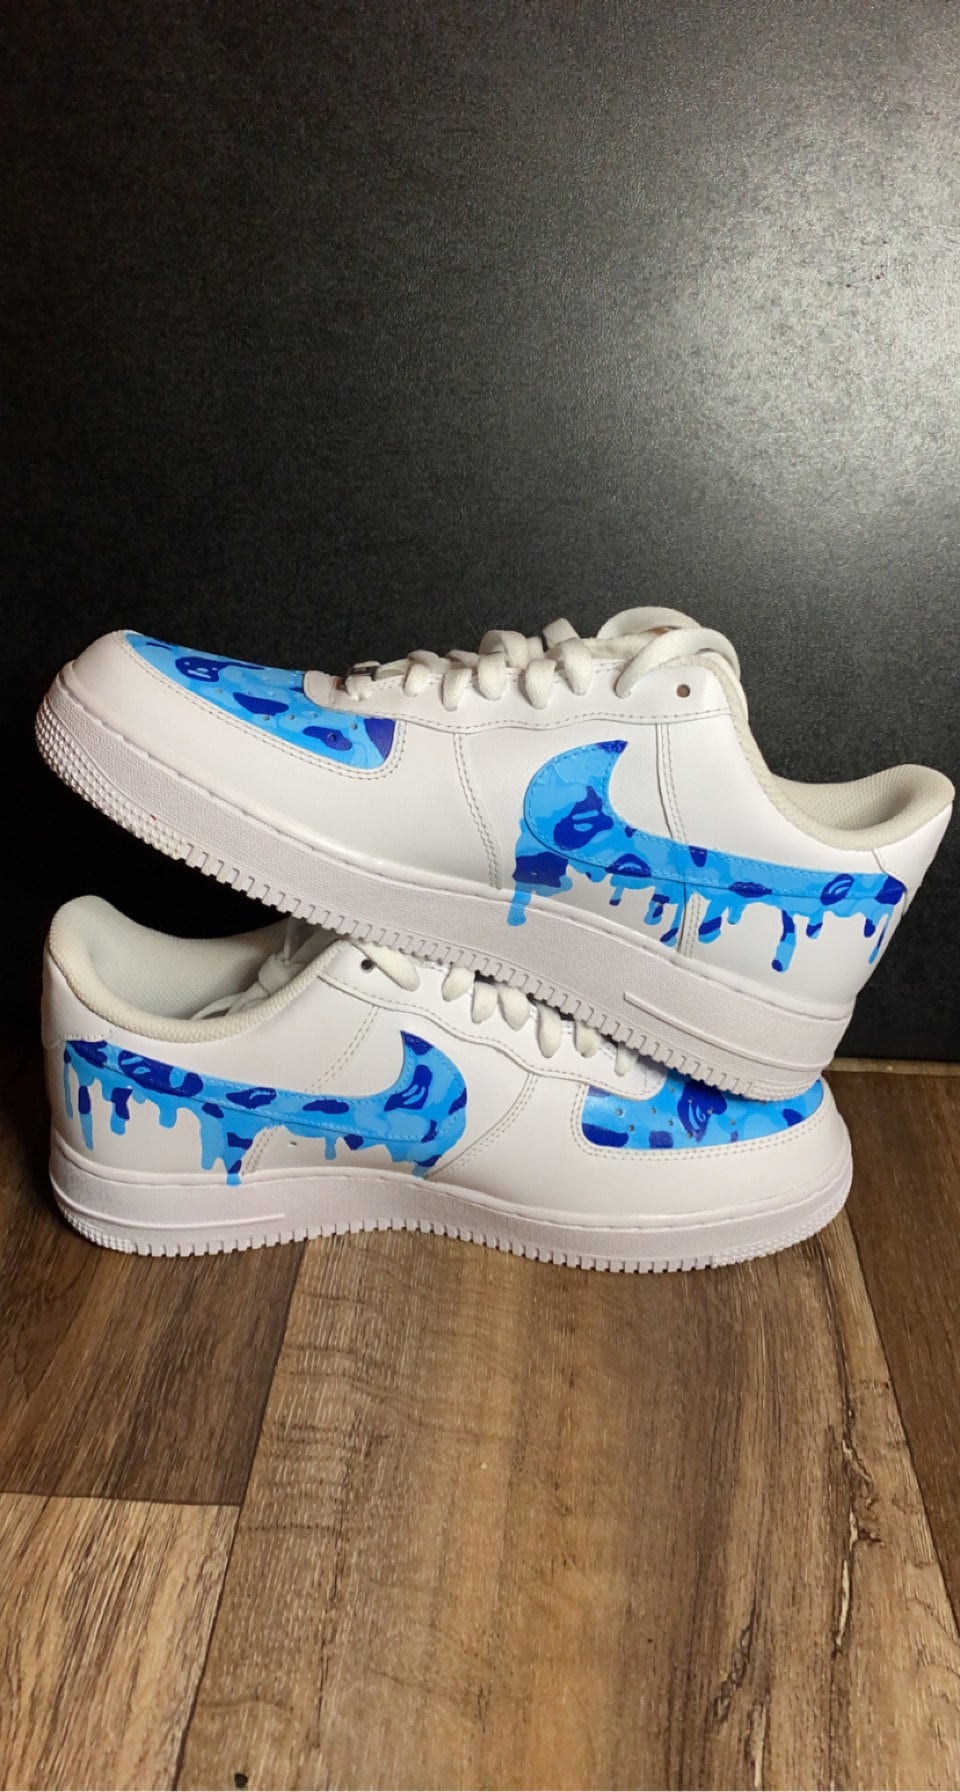 Bape Custom Shoes Painted With Vinyl Stencils  Custom shoes, Painted shoes,  Painted sneakers